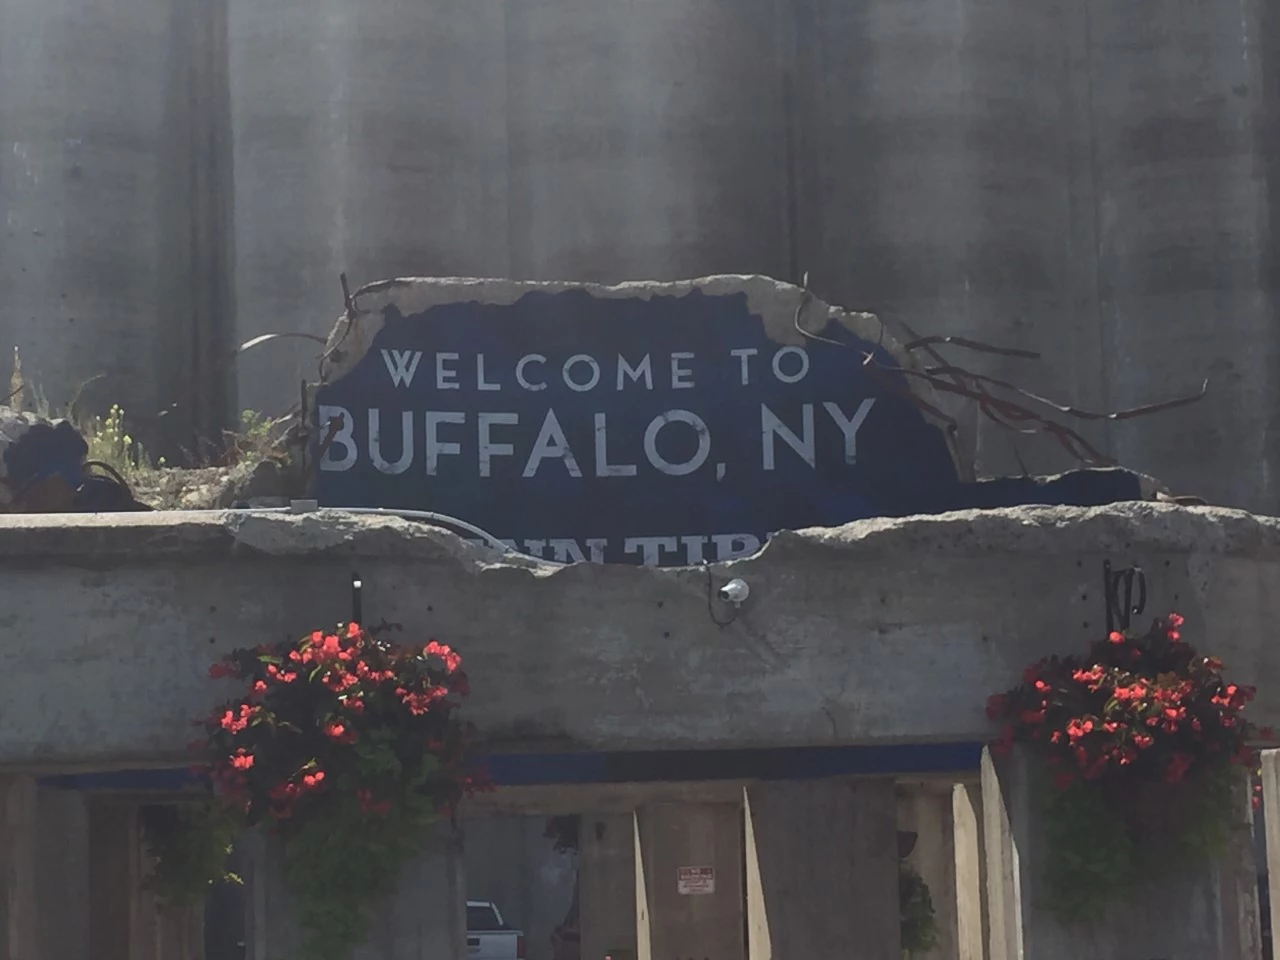 57 Fun Facts You Might Not Know About Buffalo